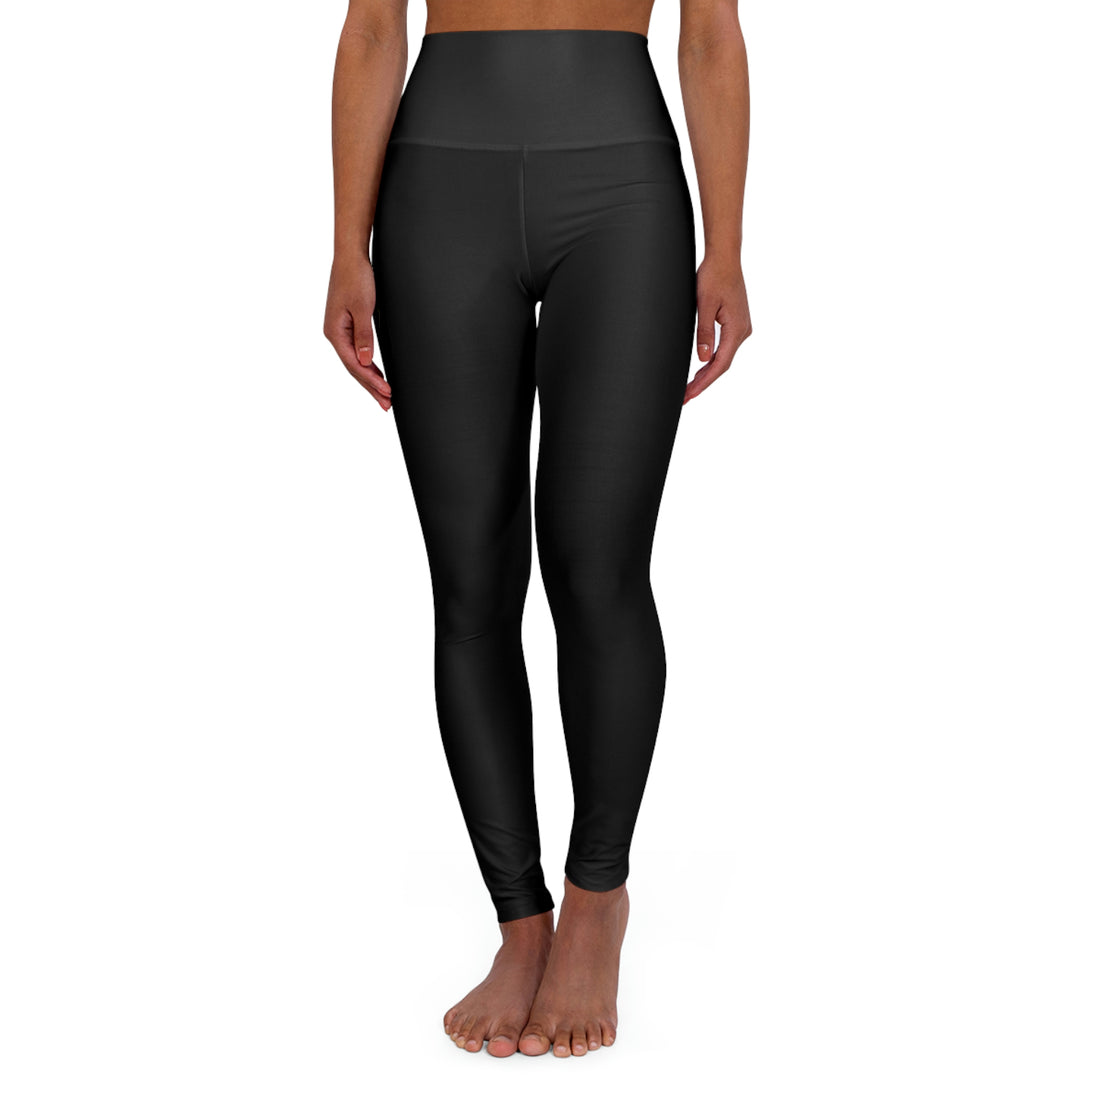 Overcome Through Courage and Strength - Black High Waisted Yoga Leggings